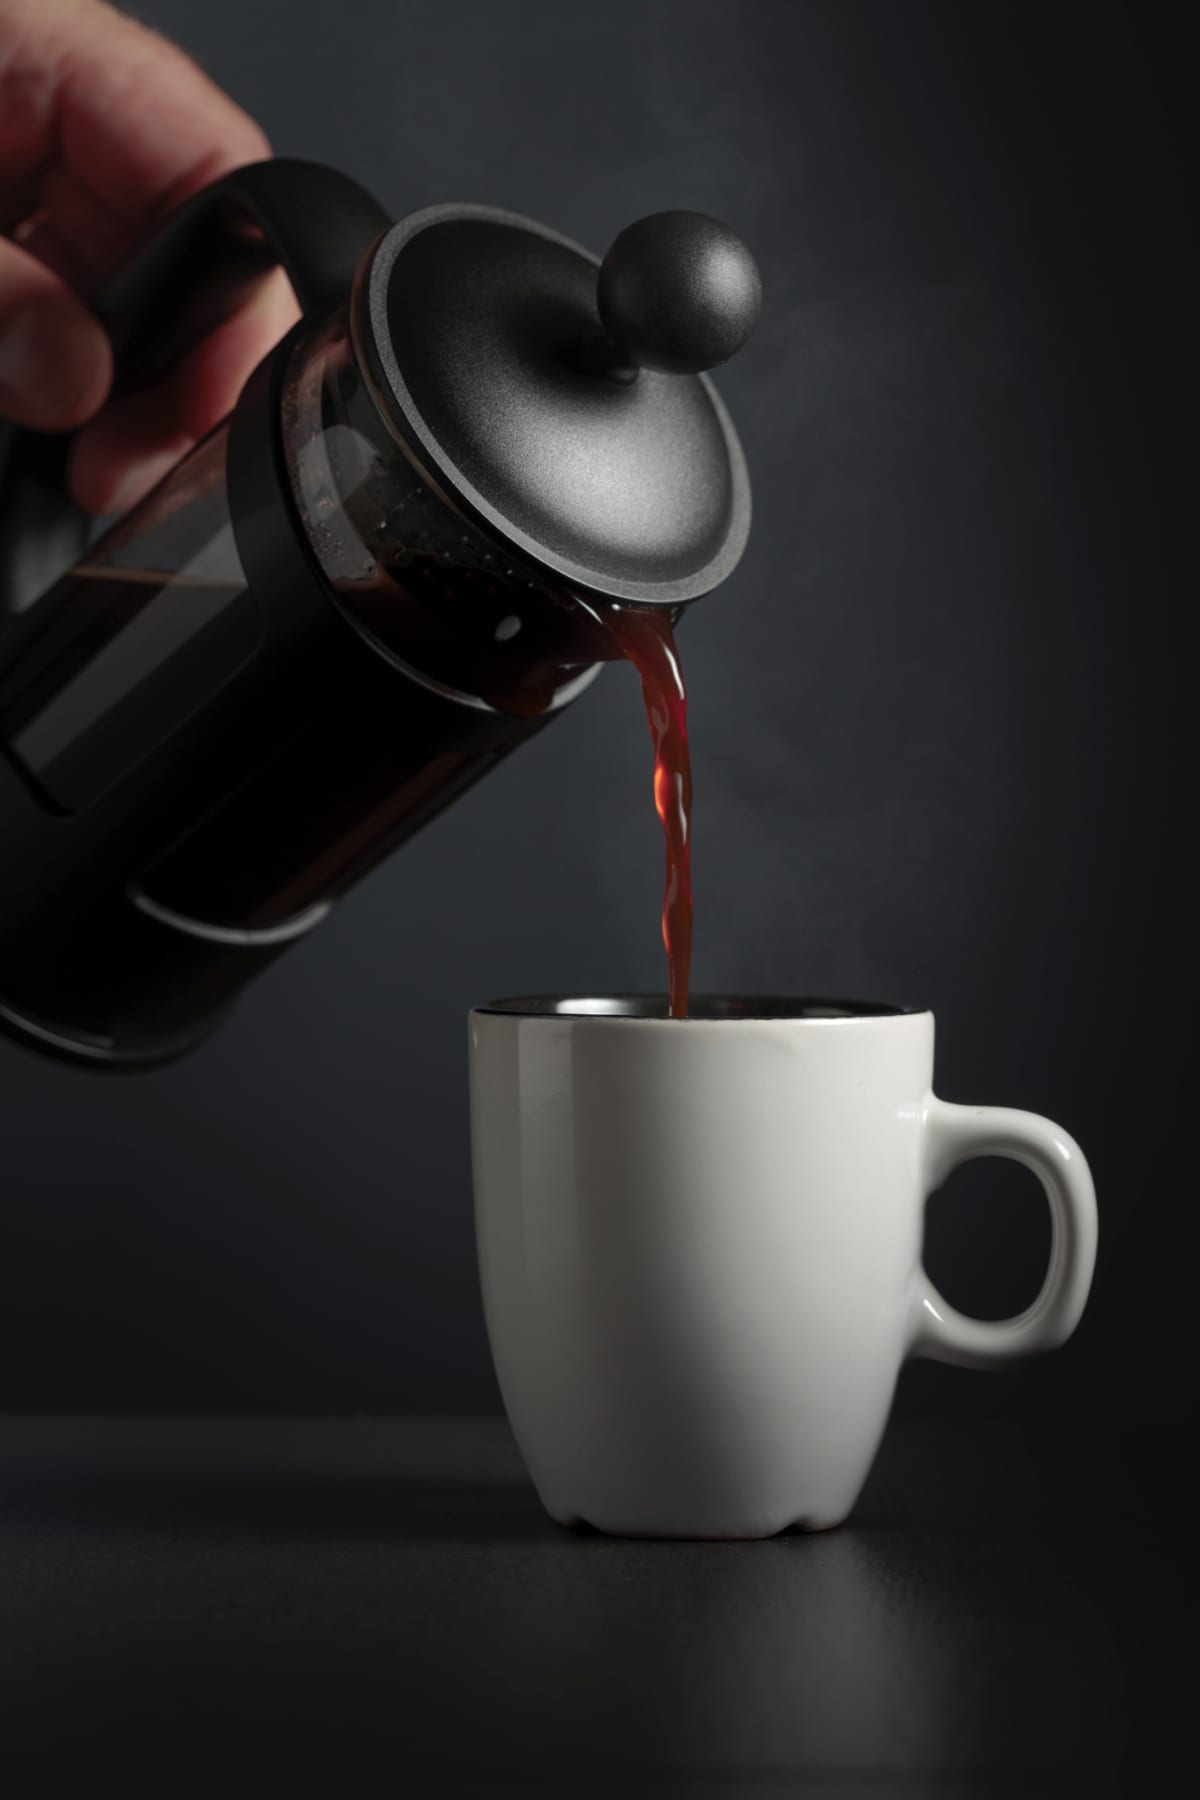 Pouring French press coffee into a cup on a black table.